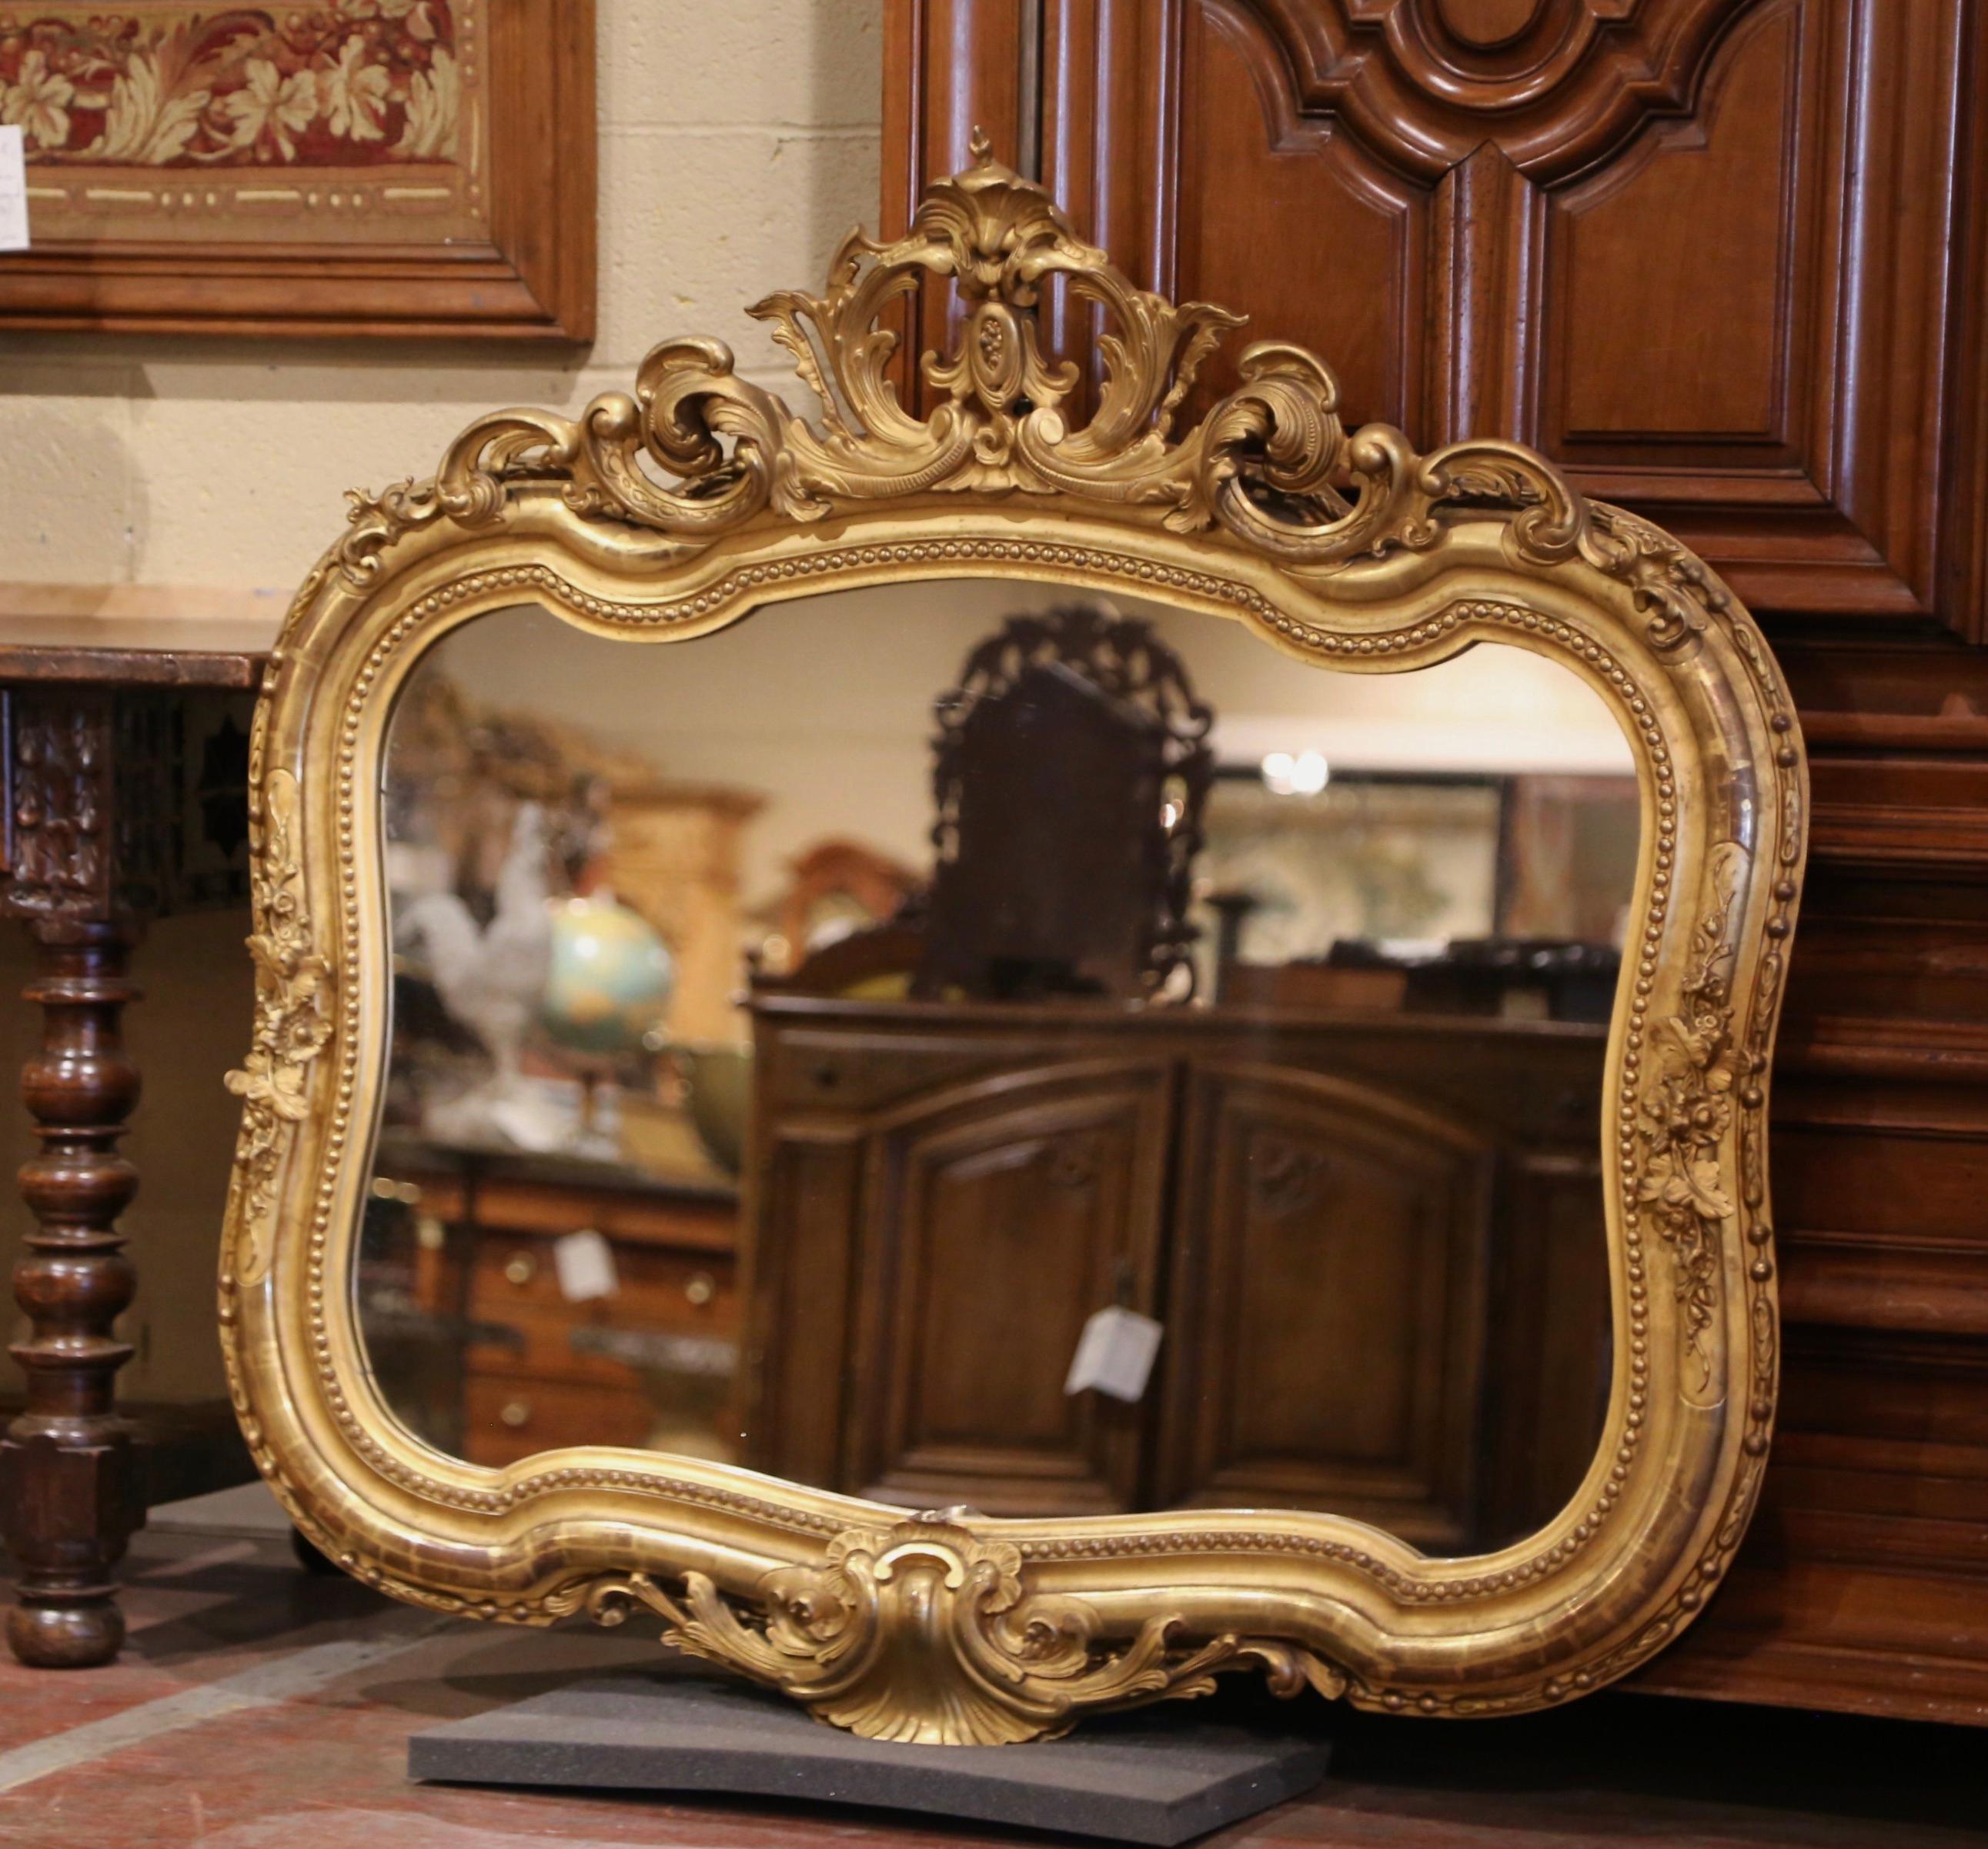 Decorate a master bathroom, entry or hallway with this elegant antique mirror. Crafted in France circa 1860, and horizontal in shape, the wall mirror is decorated with a hand carved pierced cartouche at the pediment featuring a center motif flanked